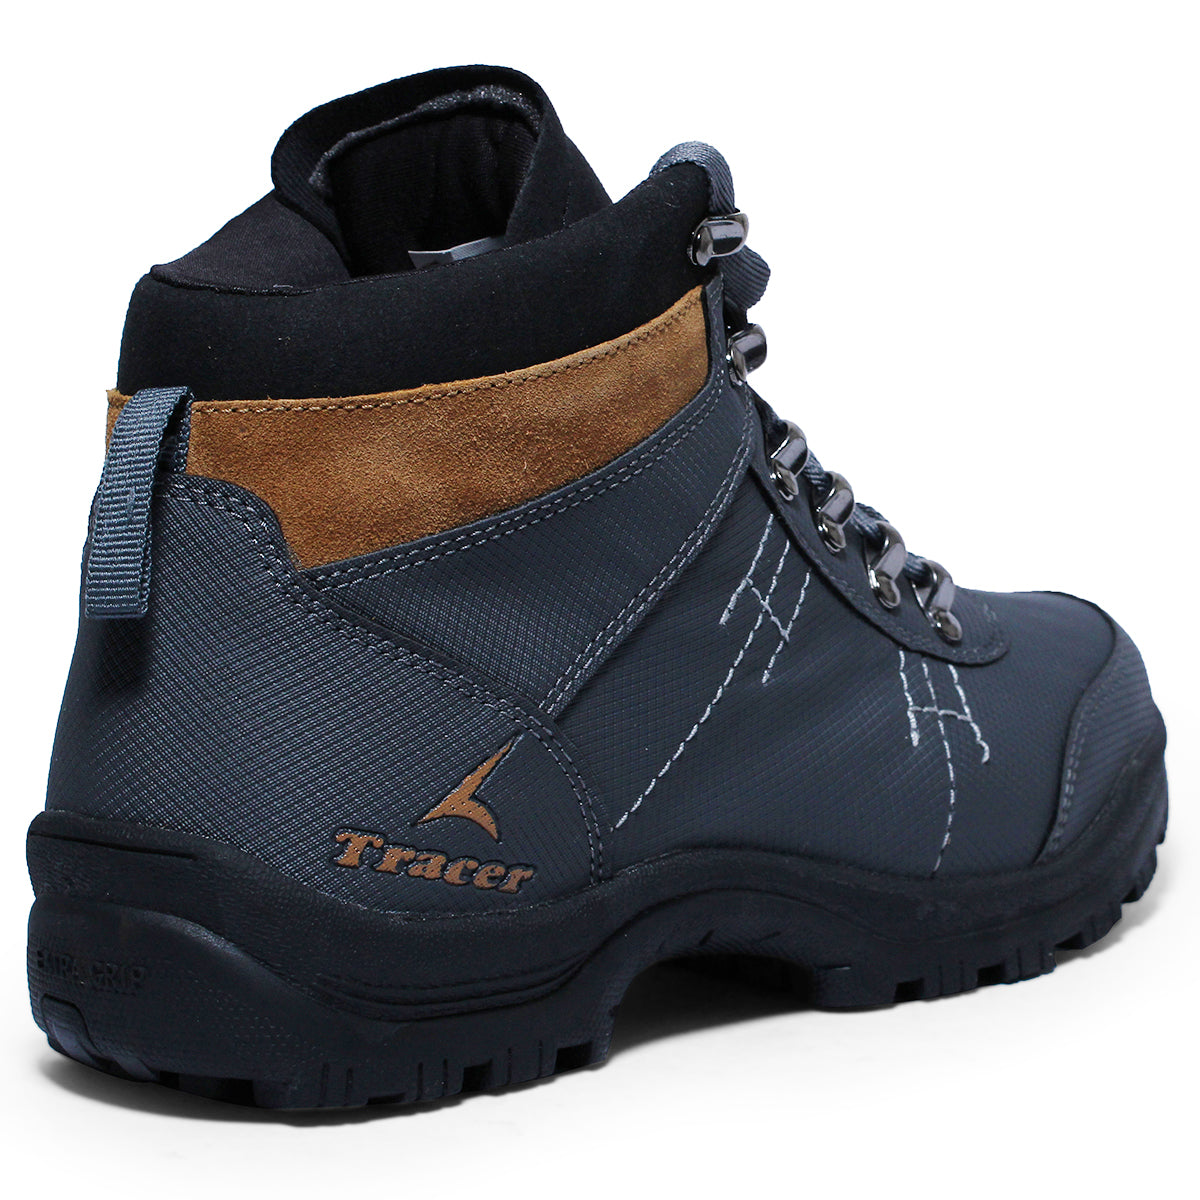 Shoes for Snow, Trekking, Hiking, Running and Walking D GREY 